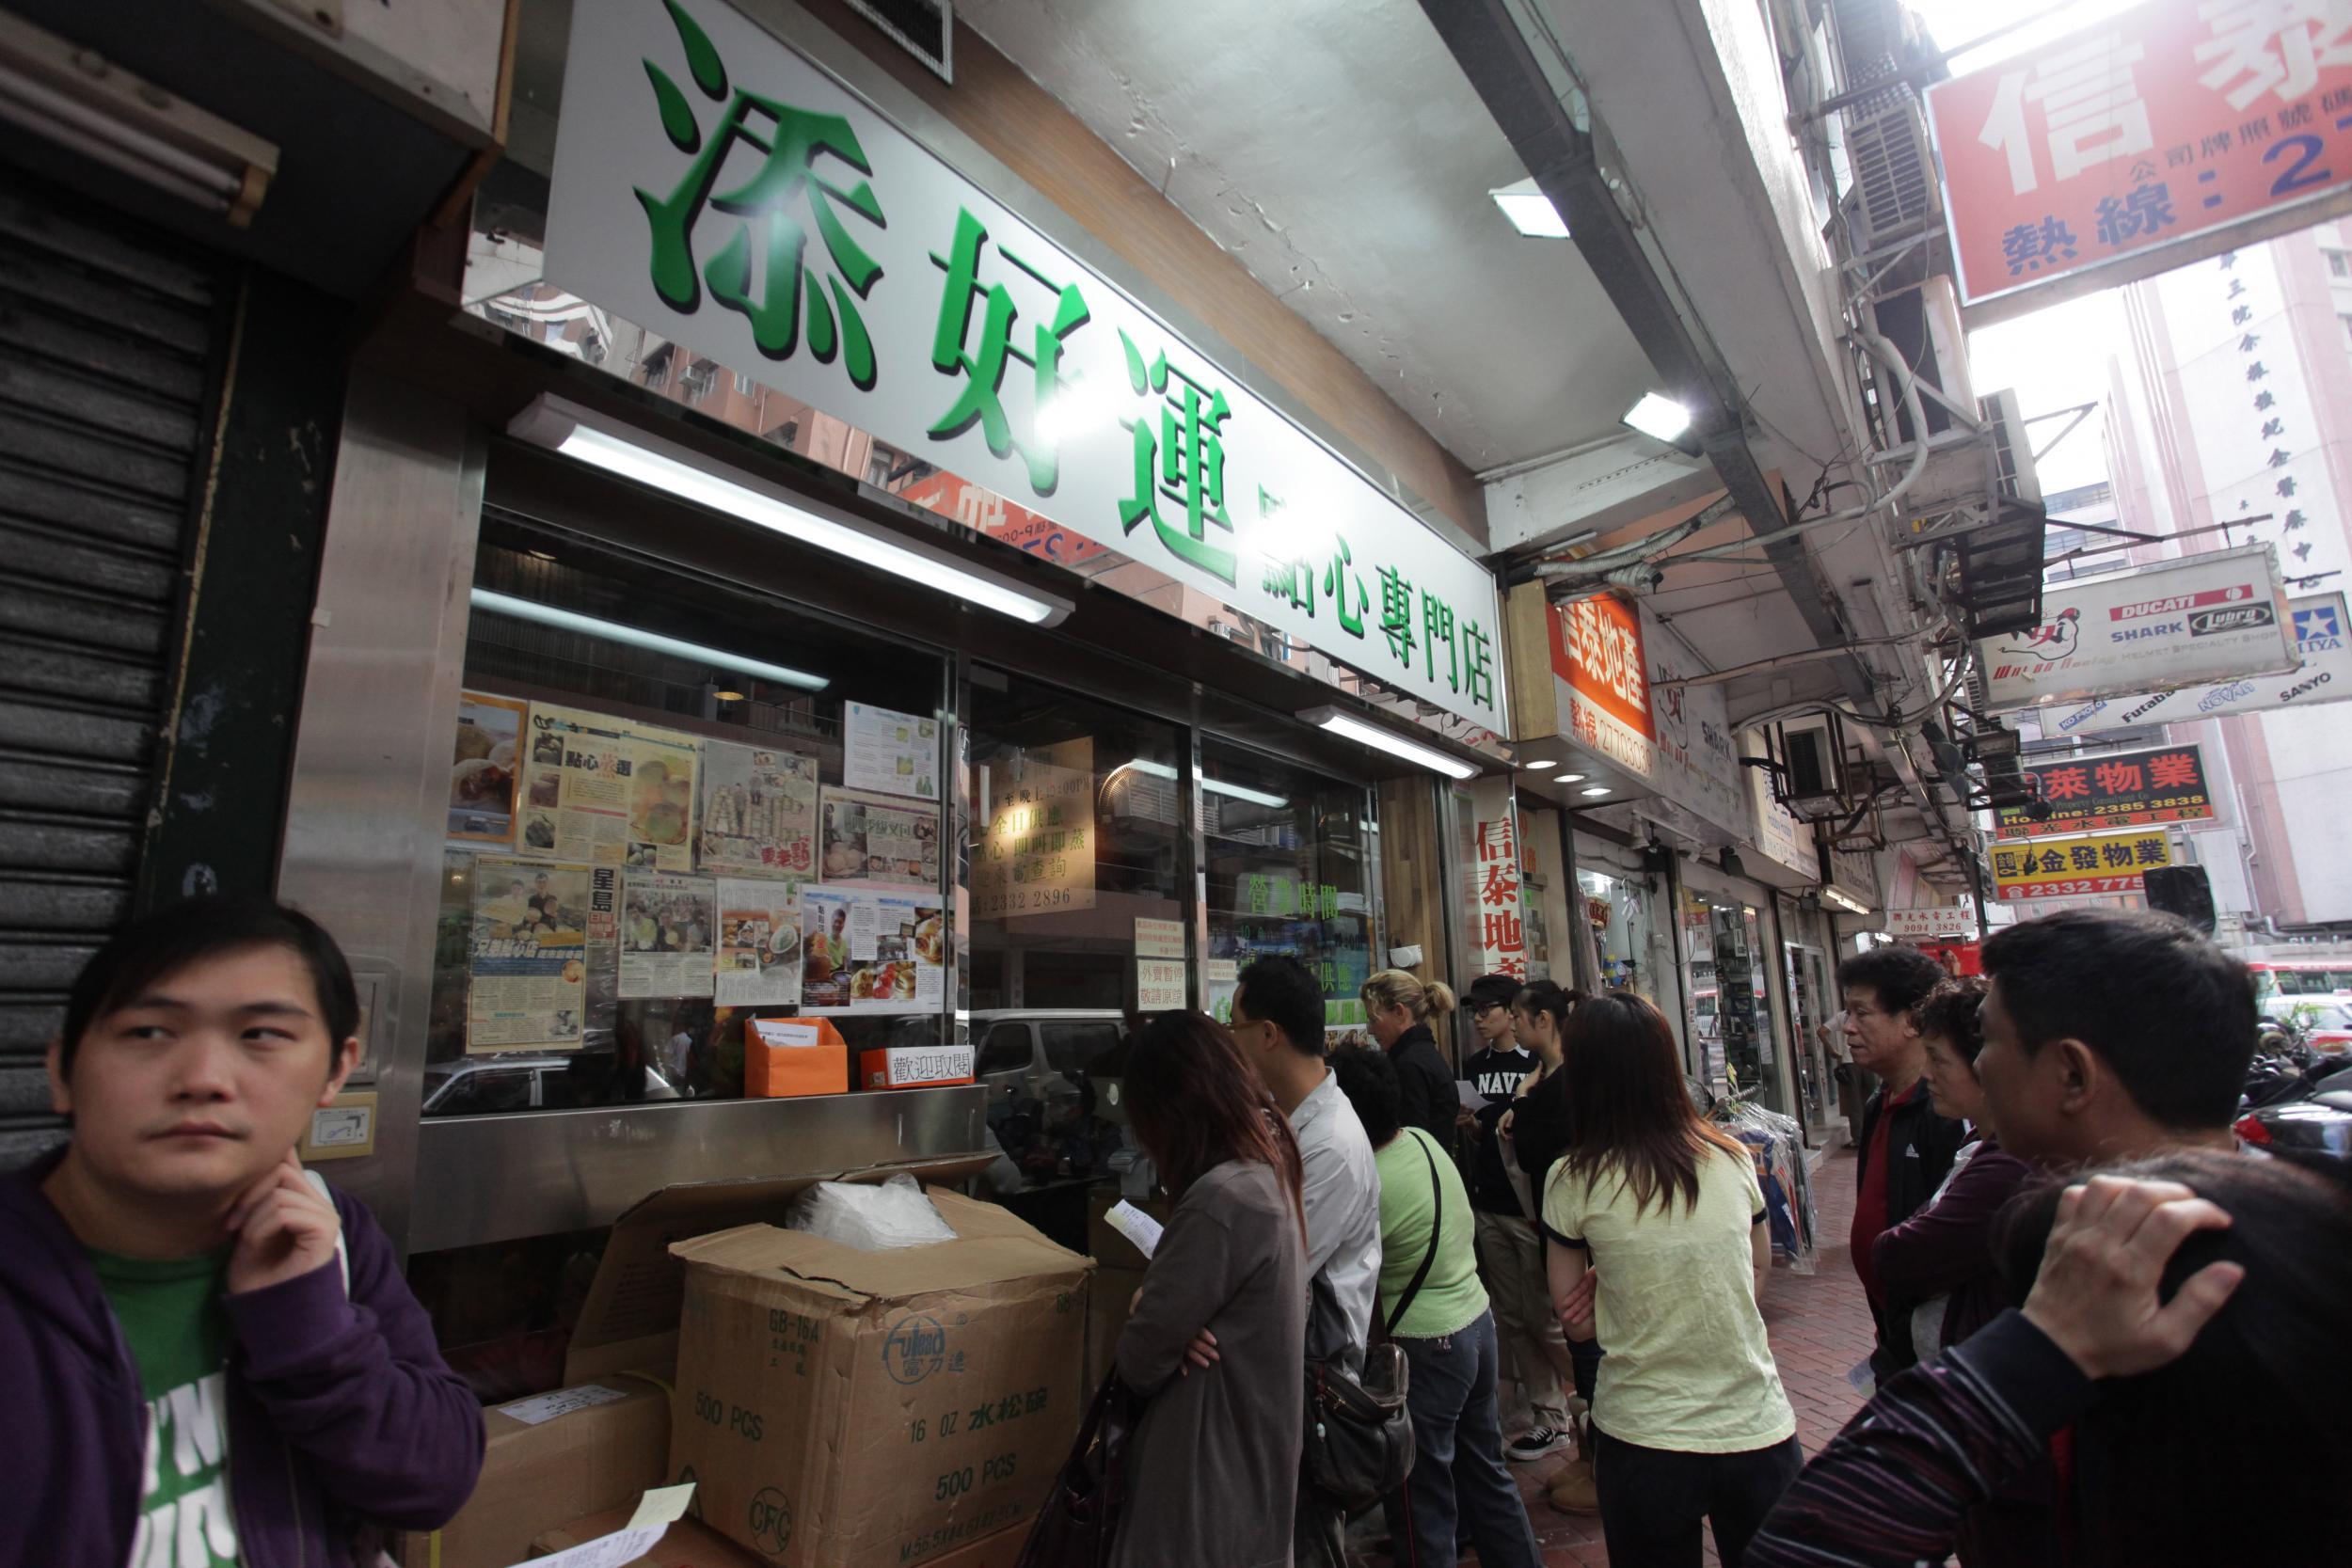 Hong Kong dim sum joint Tim Ho Wan offers Michelin-starred dishes at around £2 each